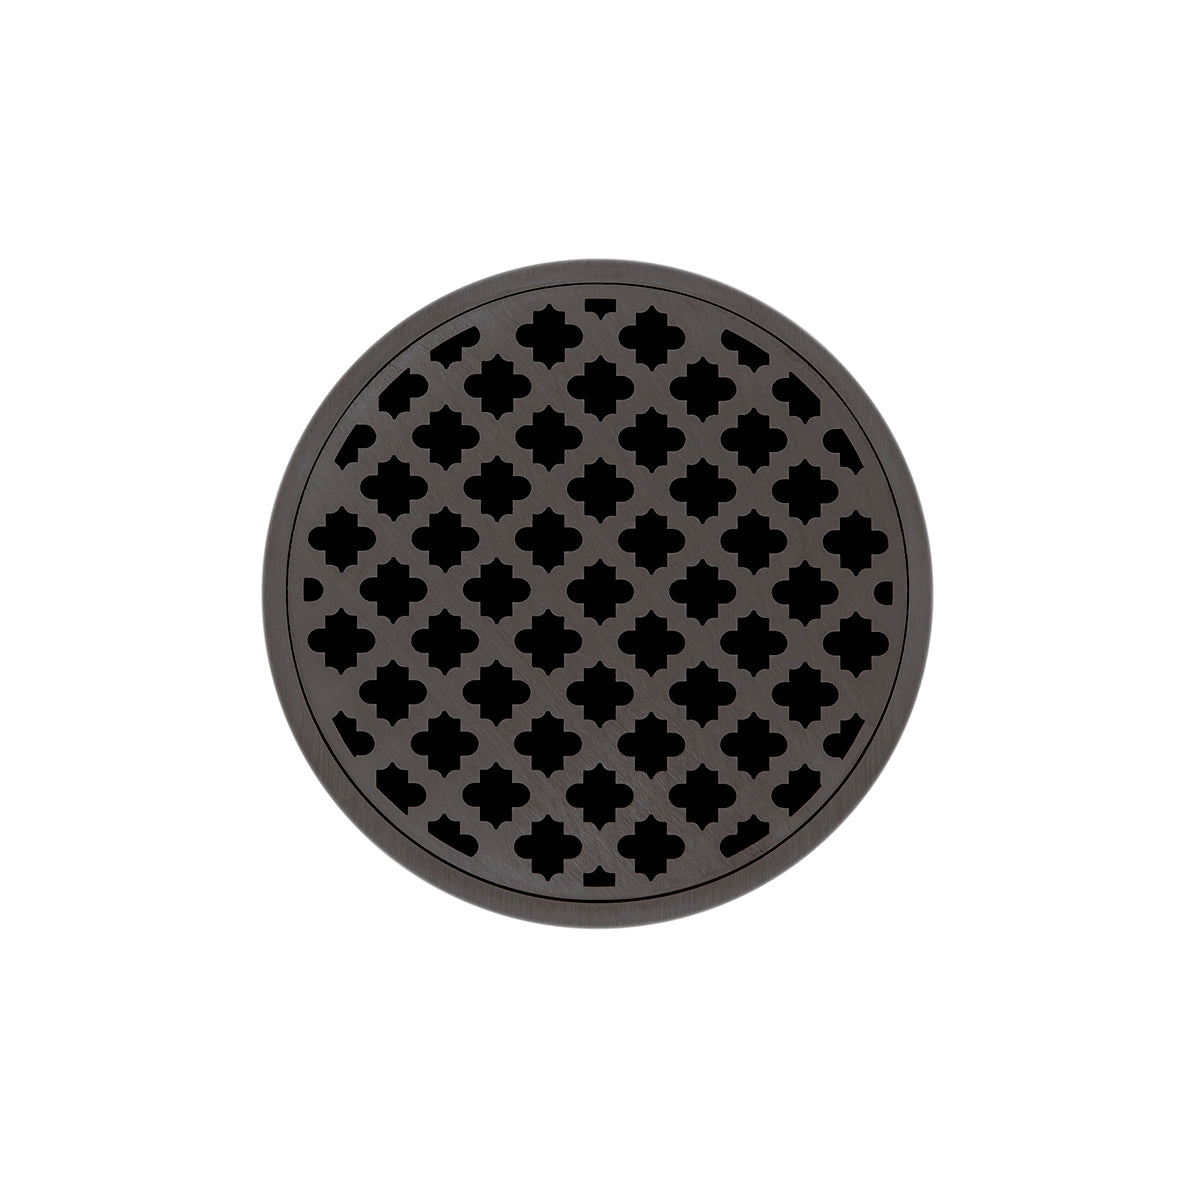 Infinity Drain 5" Round RMD 5 Premium Center Drain Kit with Moor Pattern Decorative Plate with Cast Iron Drain Body, 2" Outlet